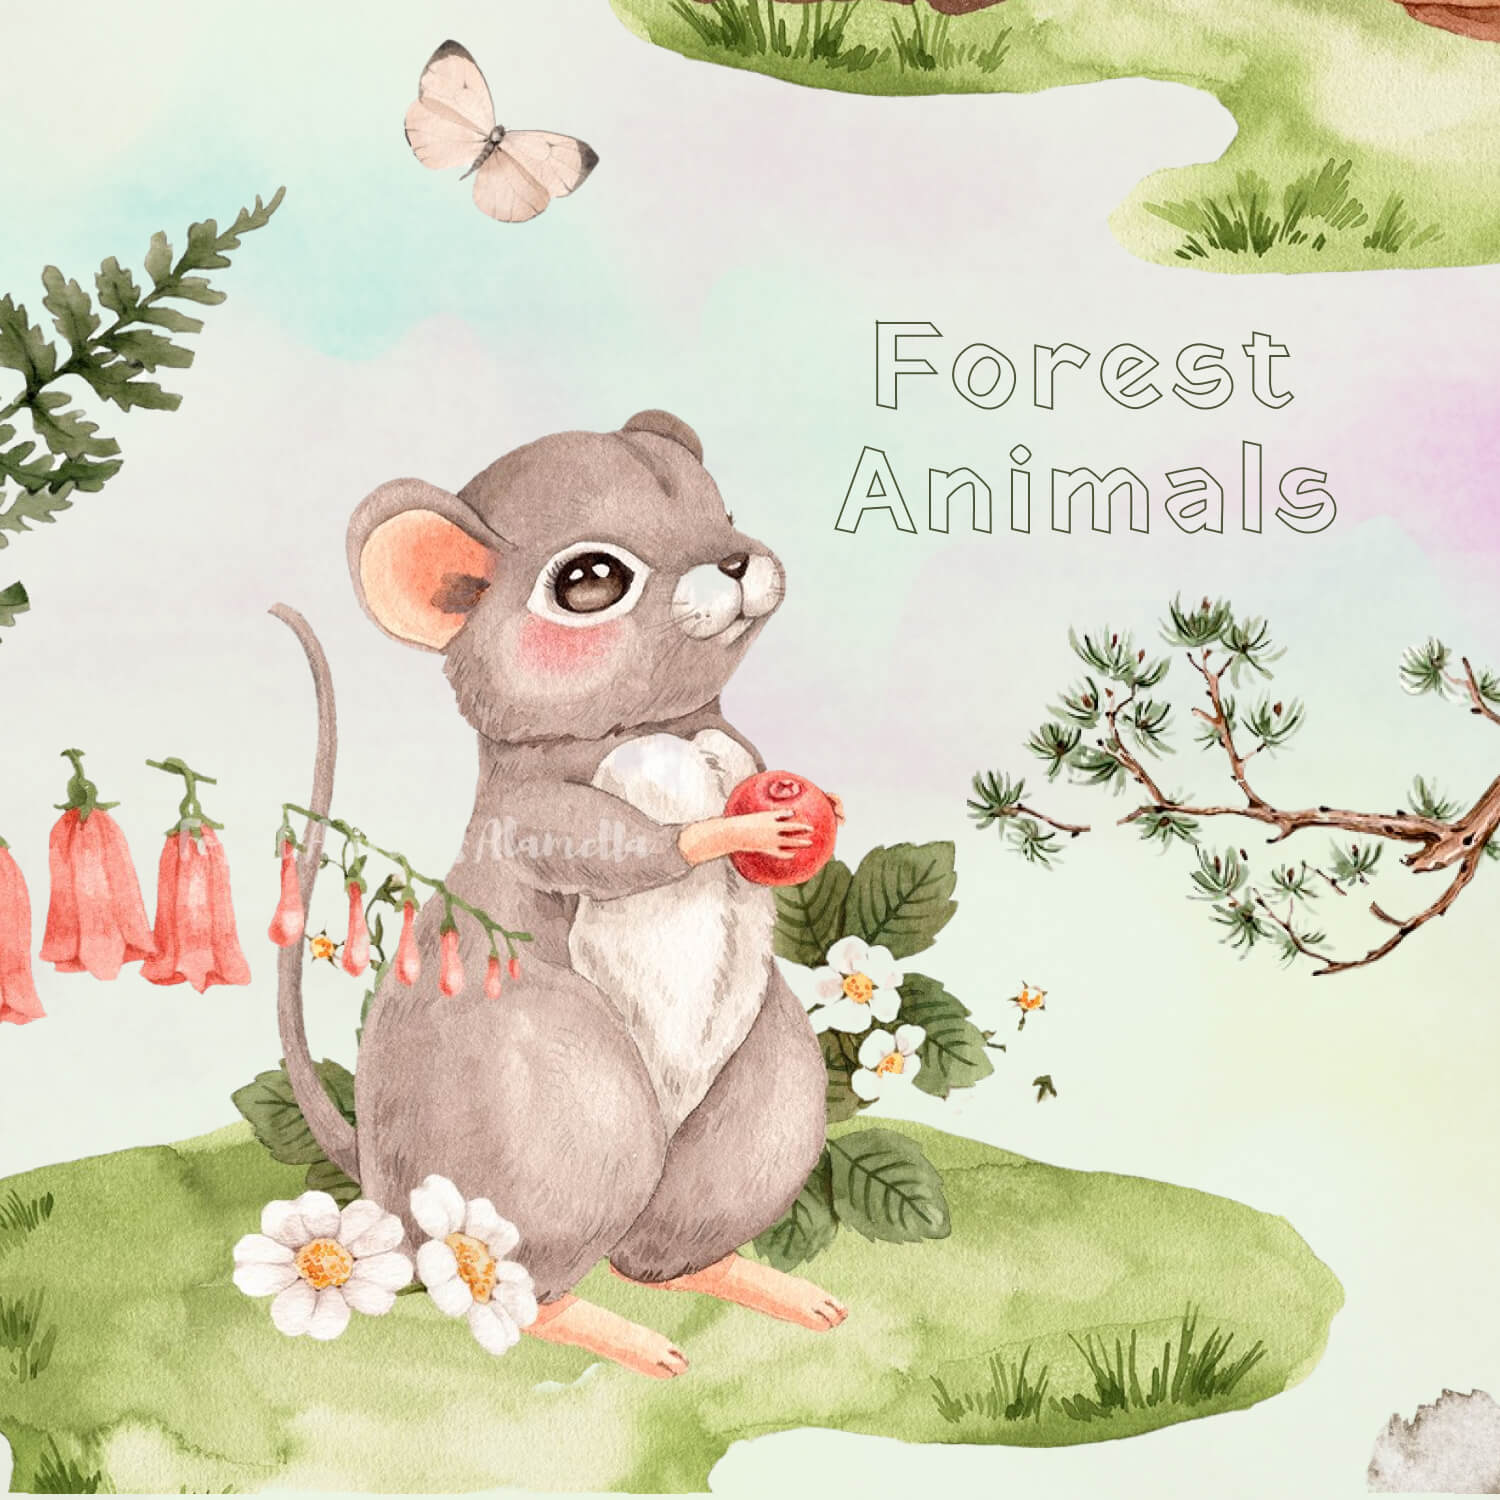 Forest animals: mouse.